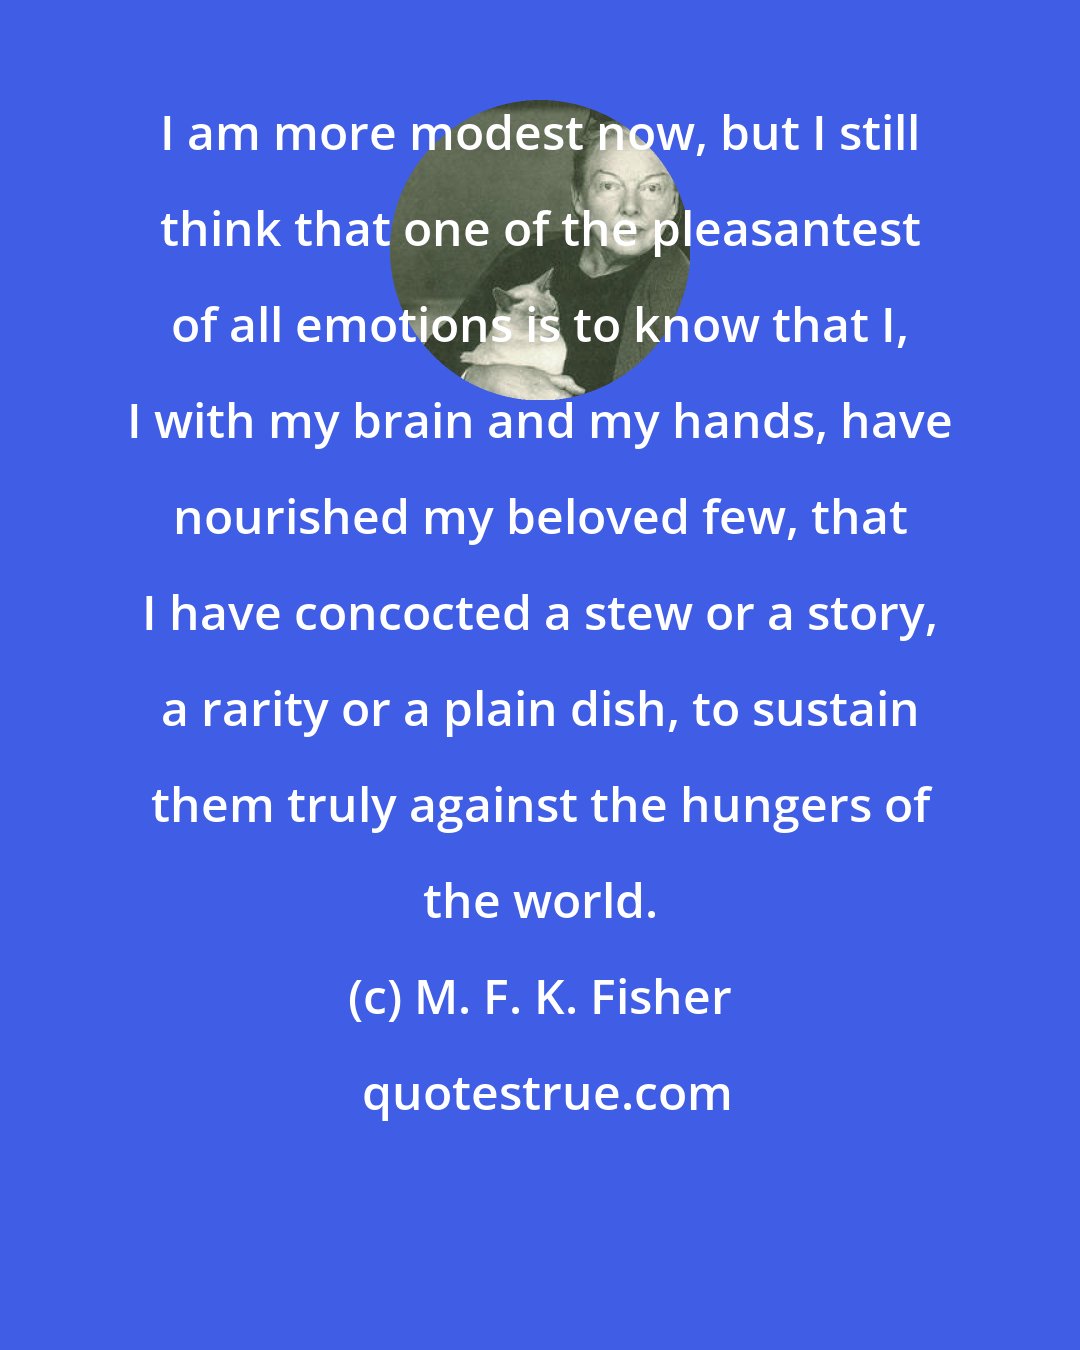 M. F. K. Fisher: I am more modest now, but I still think that one of the pleasantest of all emotions is to know that I, I with my brain and my hands, have nourished my beloved few, that I have concocted a stew or a story, a rarity or a plain dish, to sustain them truly against the hungers of the world.